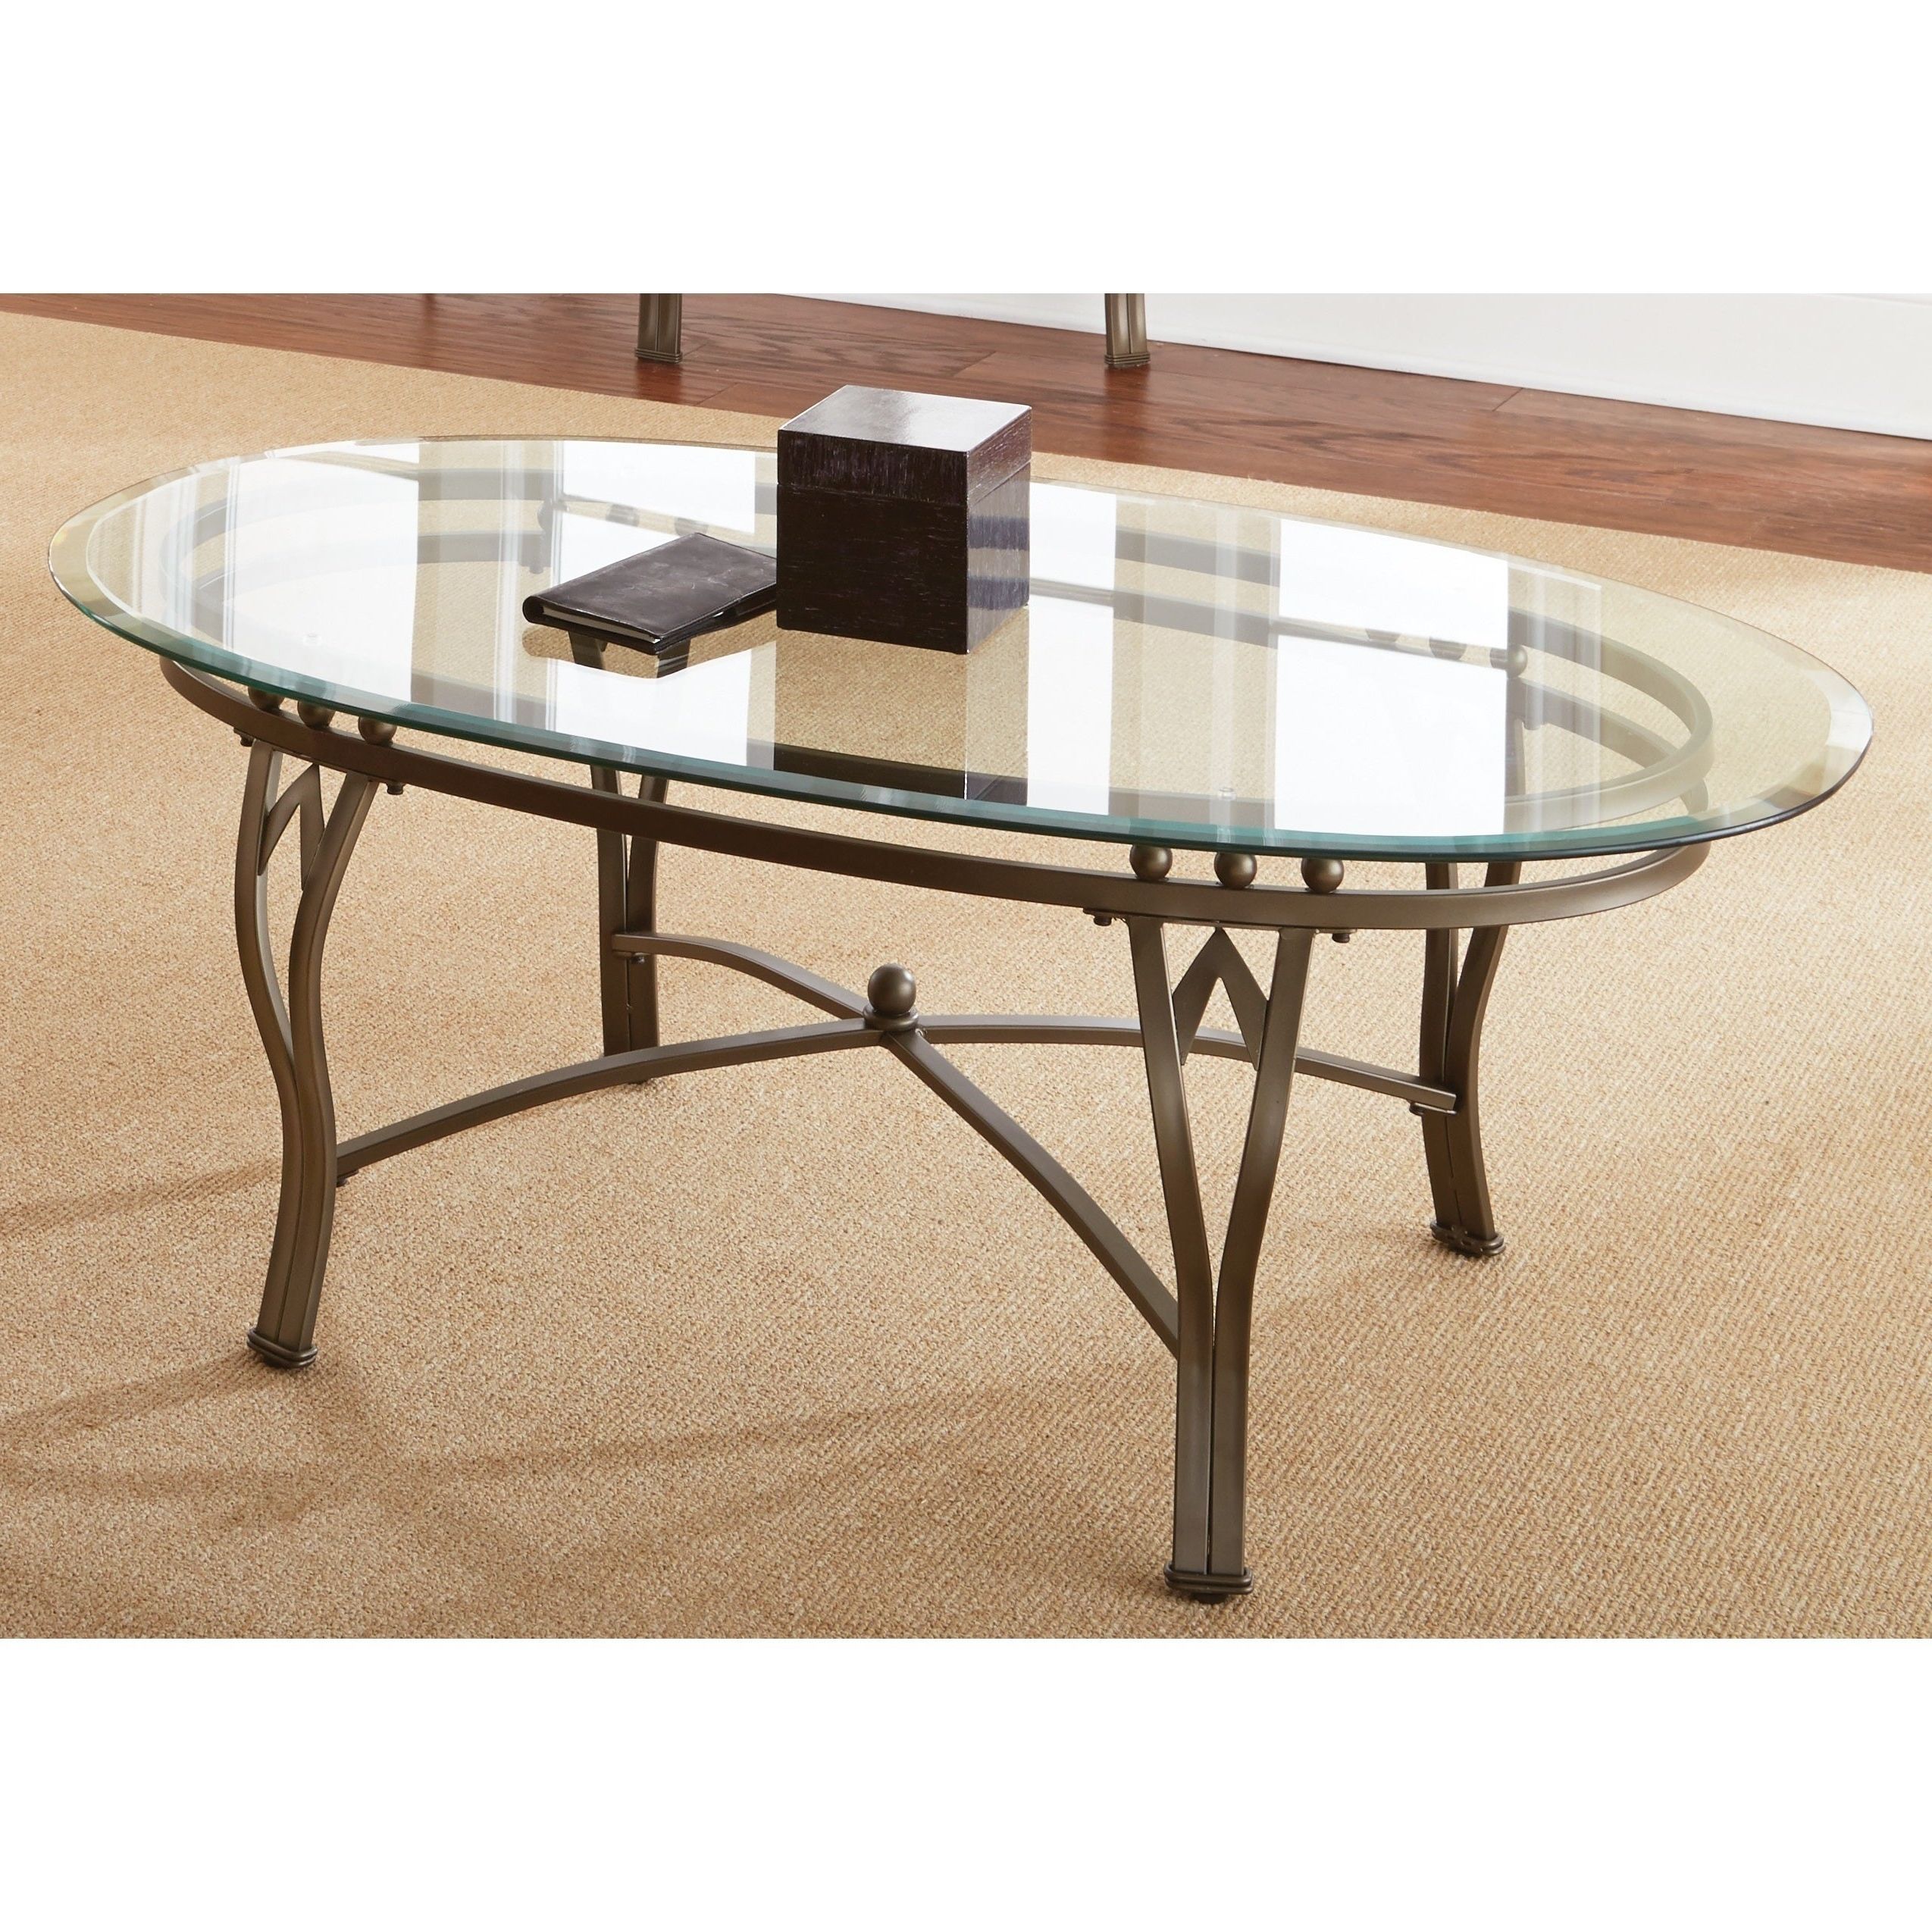 Copper Grove Woodend Glass Top Oval Coffee Table Pertaining To Most Up To Date Gracewood Hollow Fishta Antique Brass Metal Glass 3 Piece Tables (View 16 of 20)